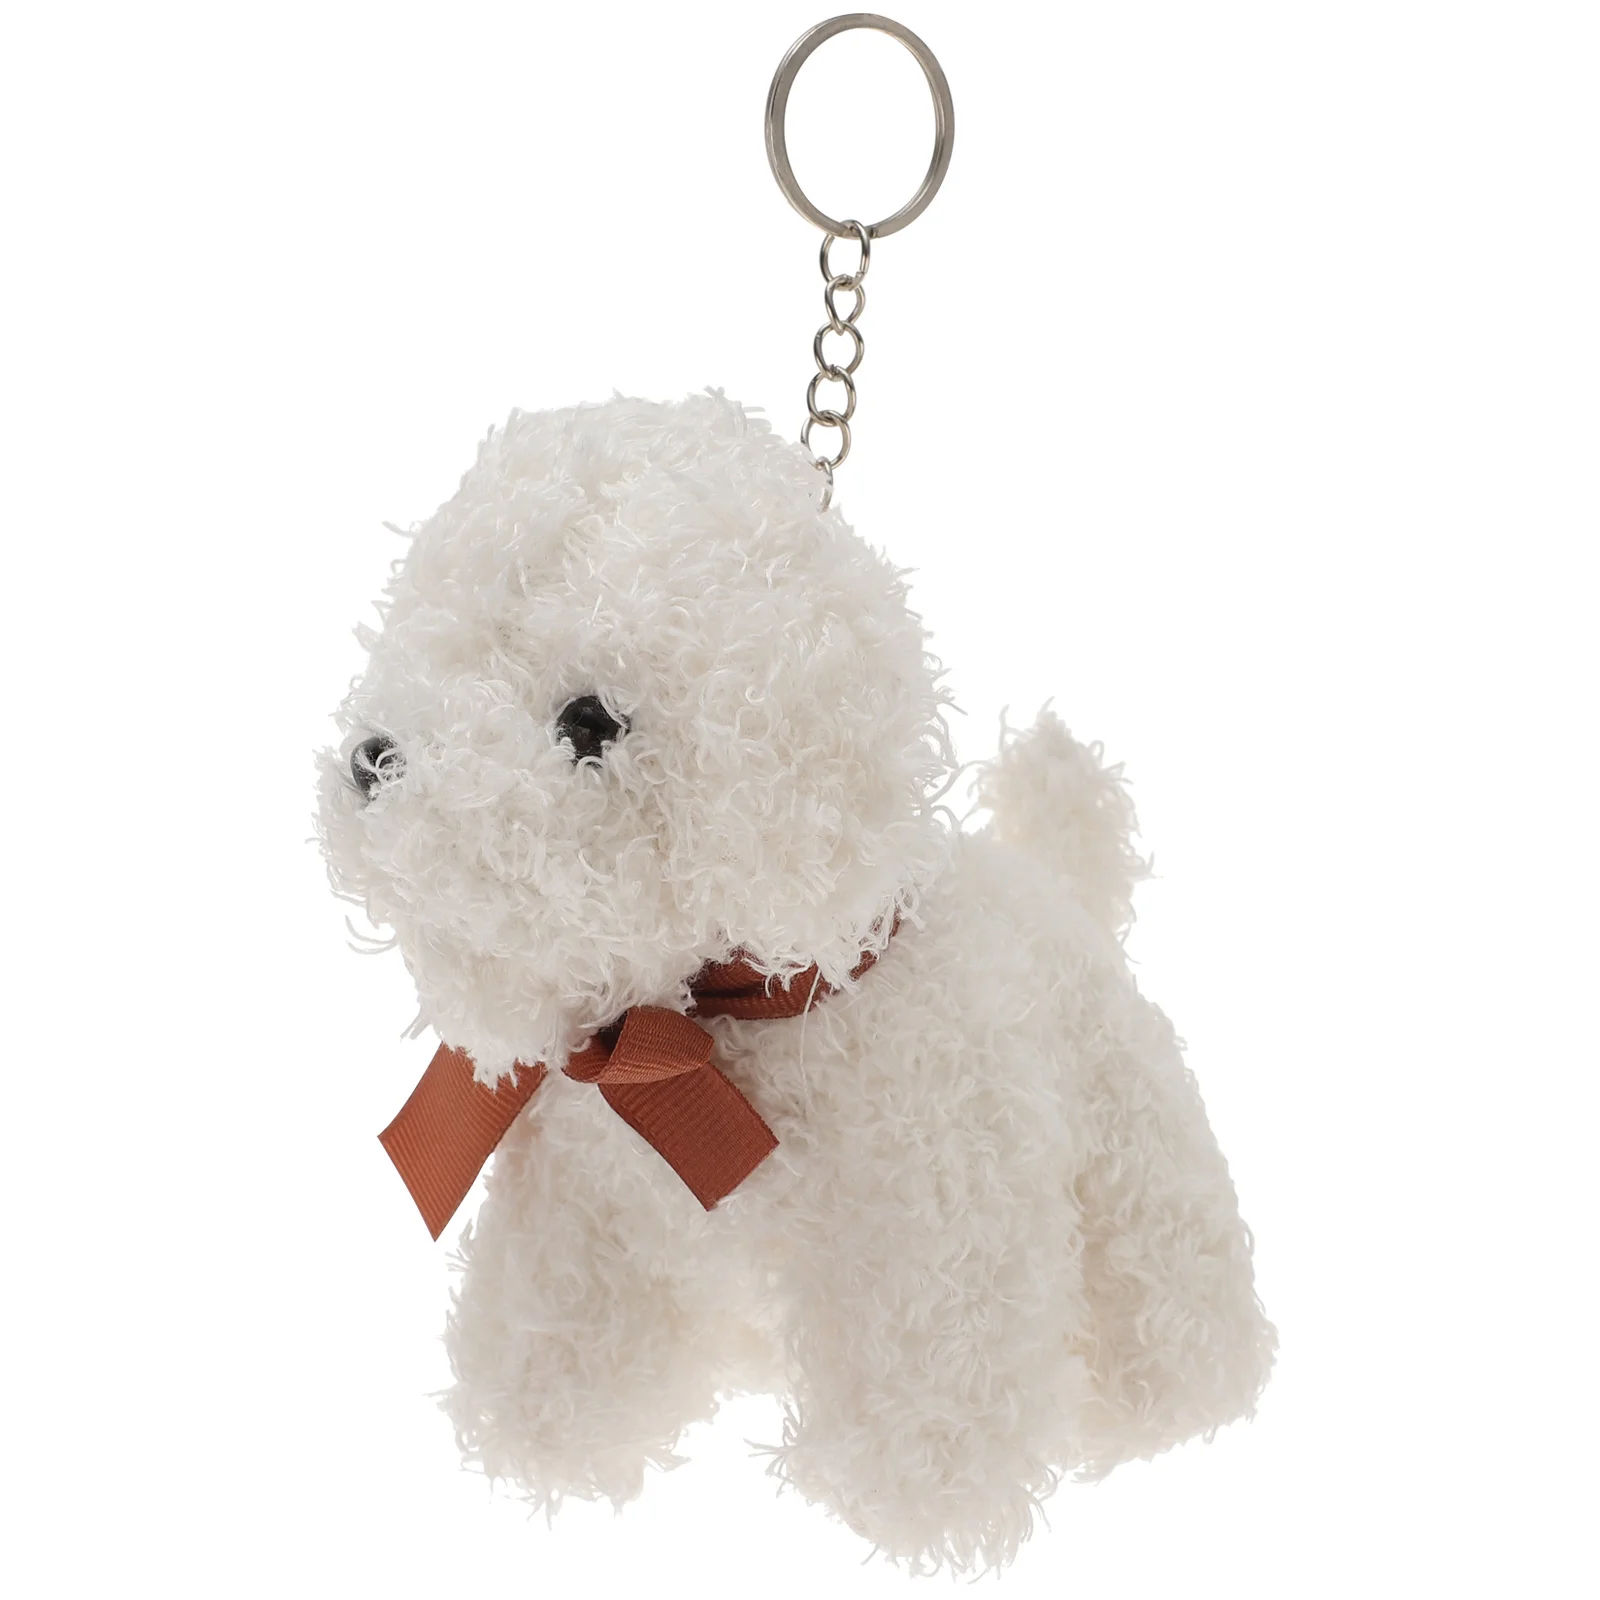 Dog Toy Keychain Ring Backpack Plush for Boys Animal Keychains Golden Retriever Rings skating keychain adorable keychains ice skates rings metal holders hanging ornaments